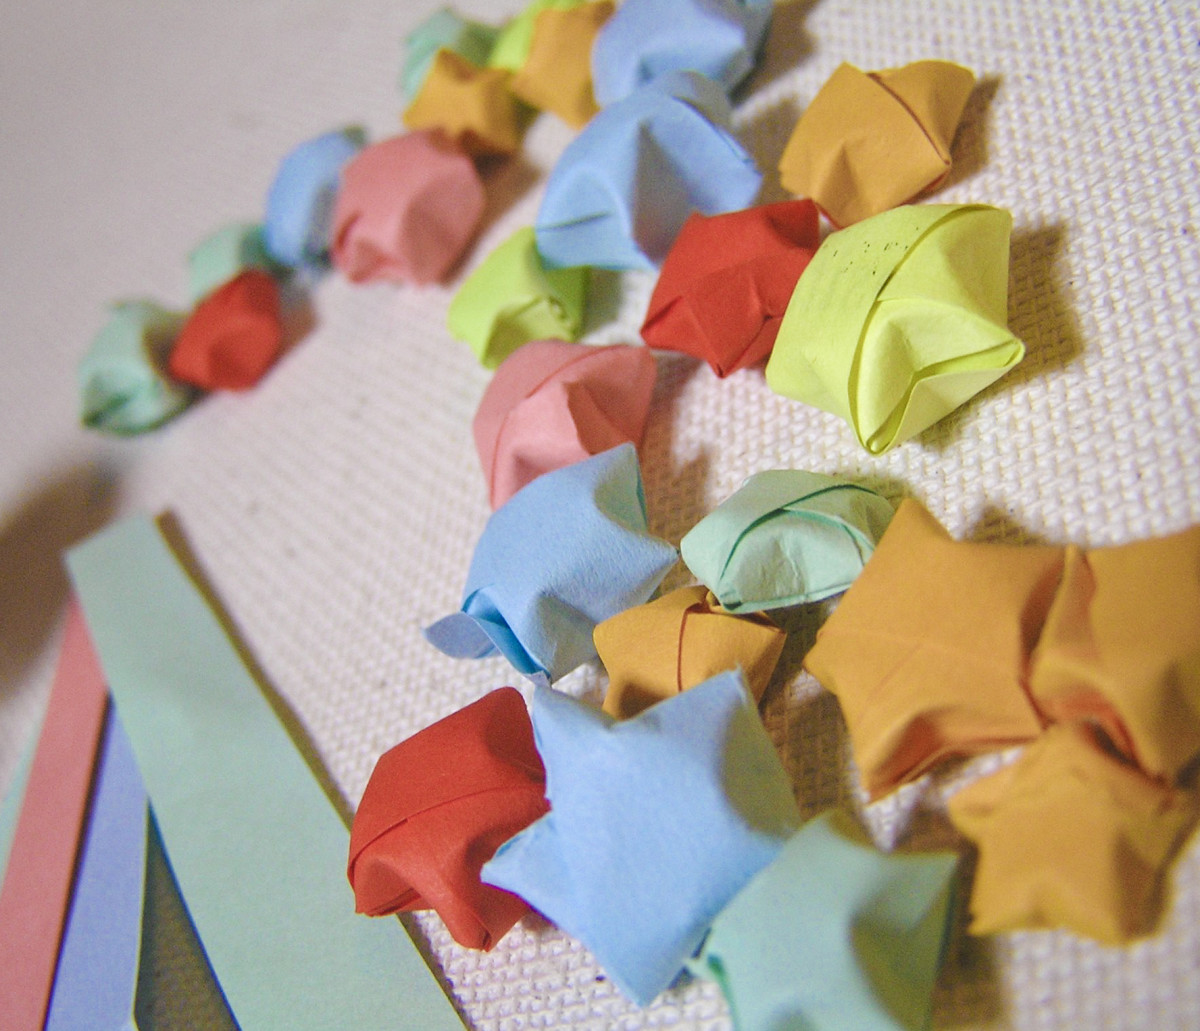 A Million Little Pieces of folded paper happiness!